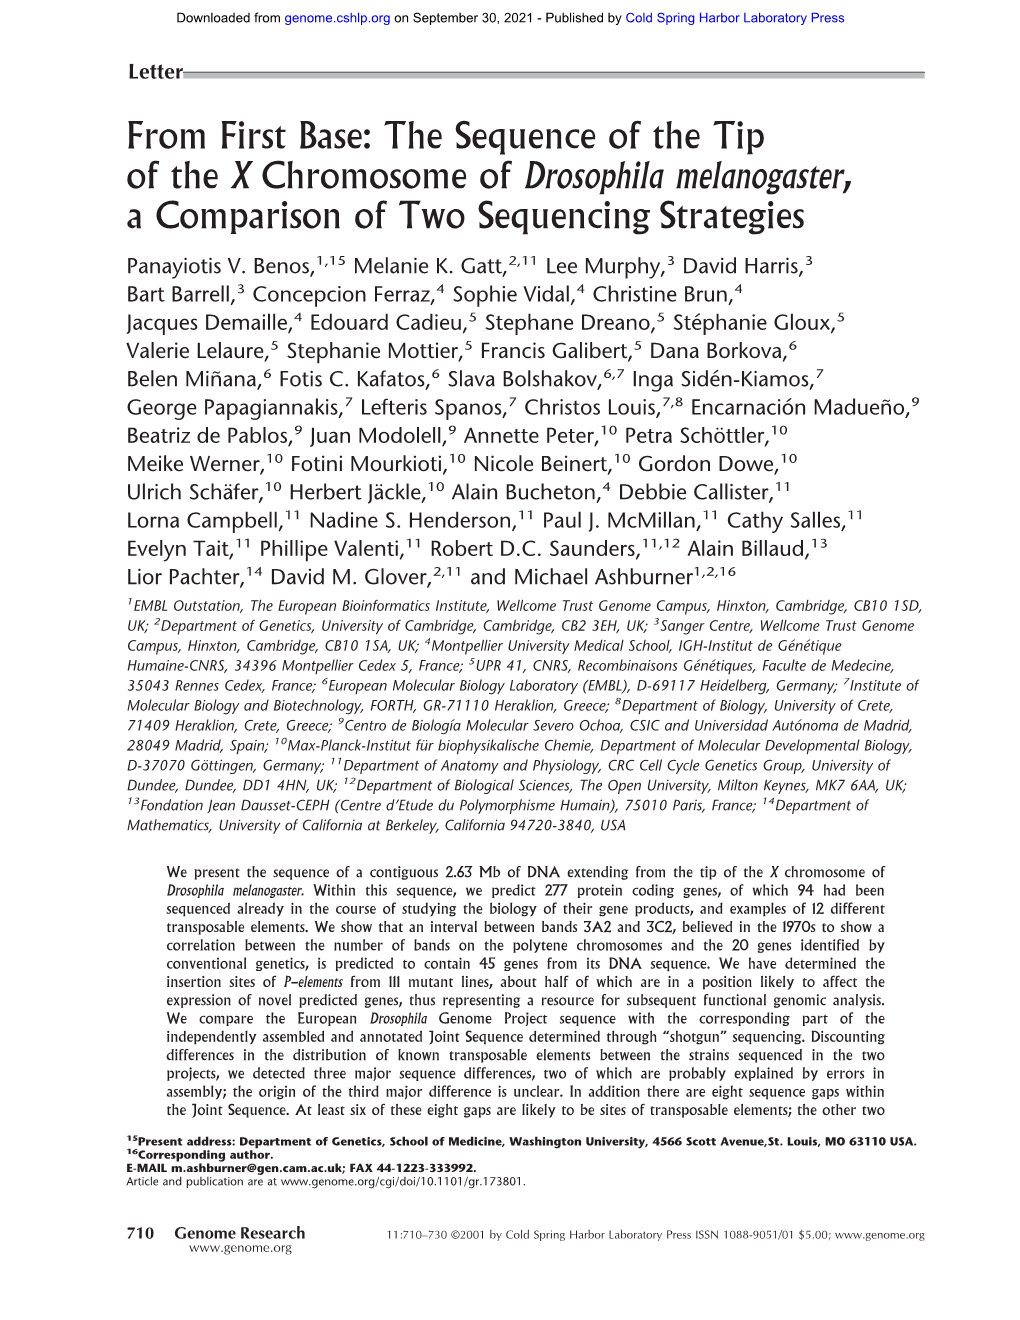 Drosophila Melanogaster, a Comparison of Two Sequencing Strategies